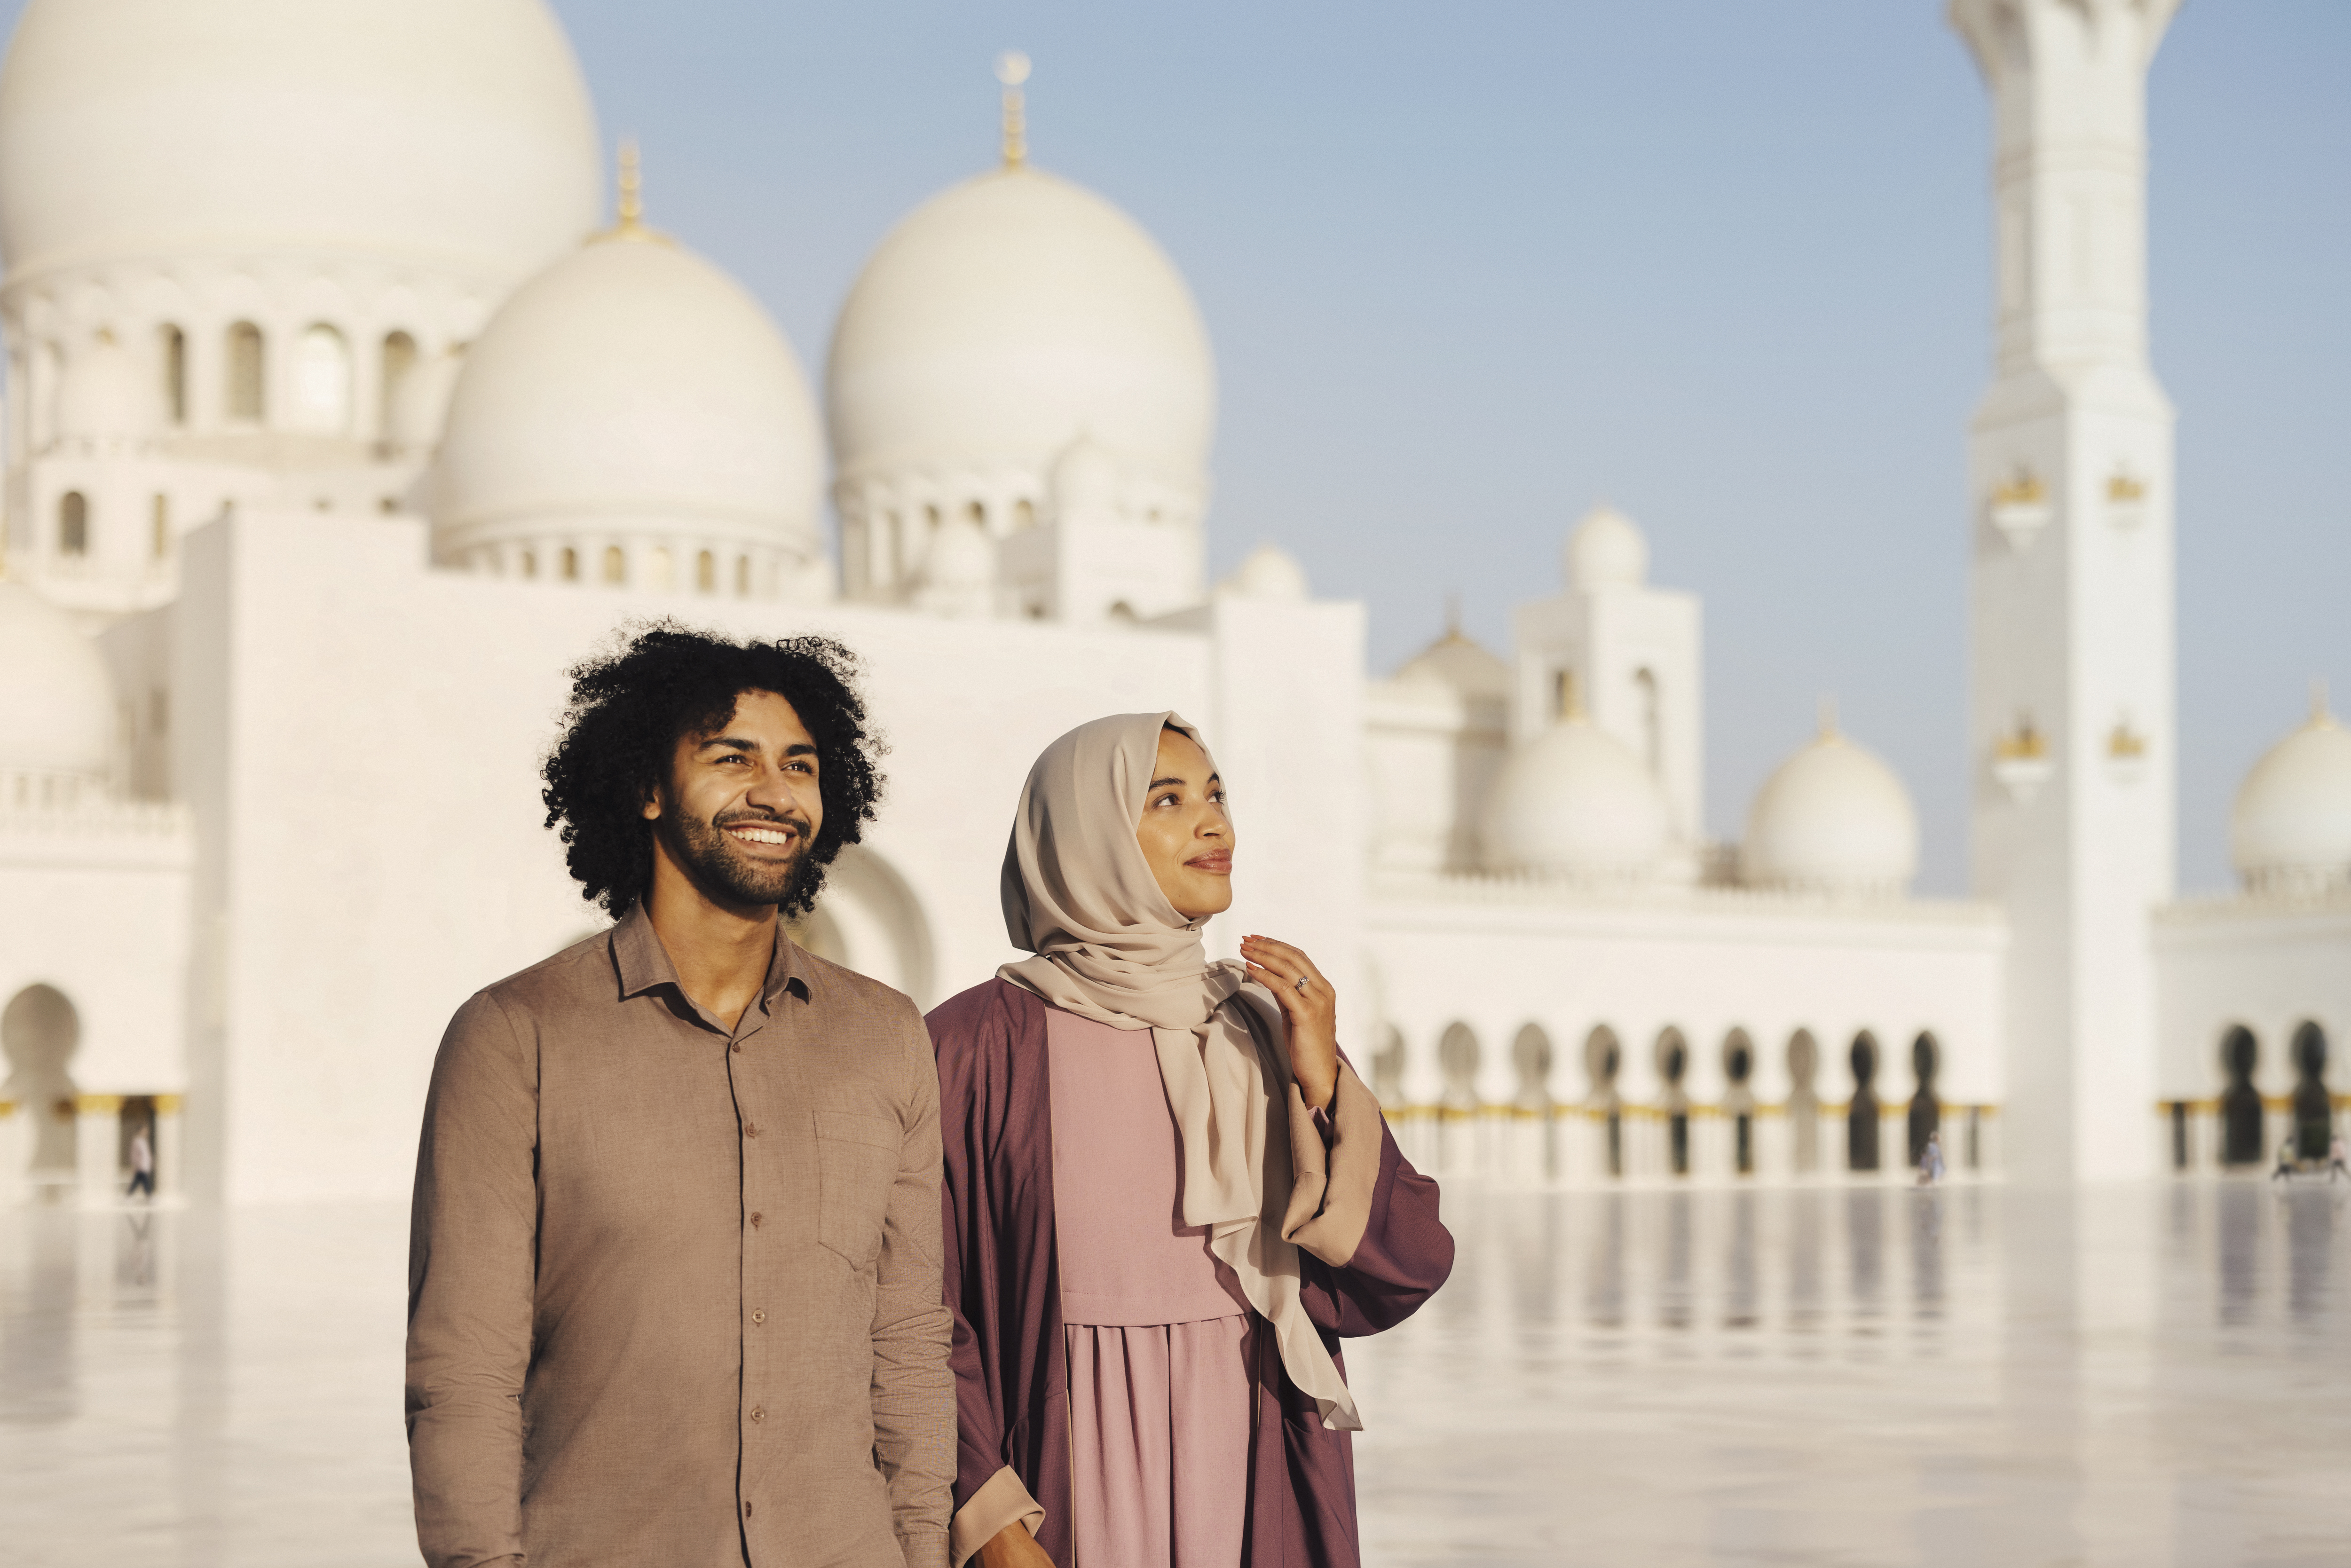 Marvel at the Sheikh Zayed Grand Mosque